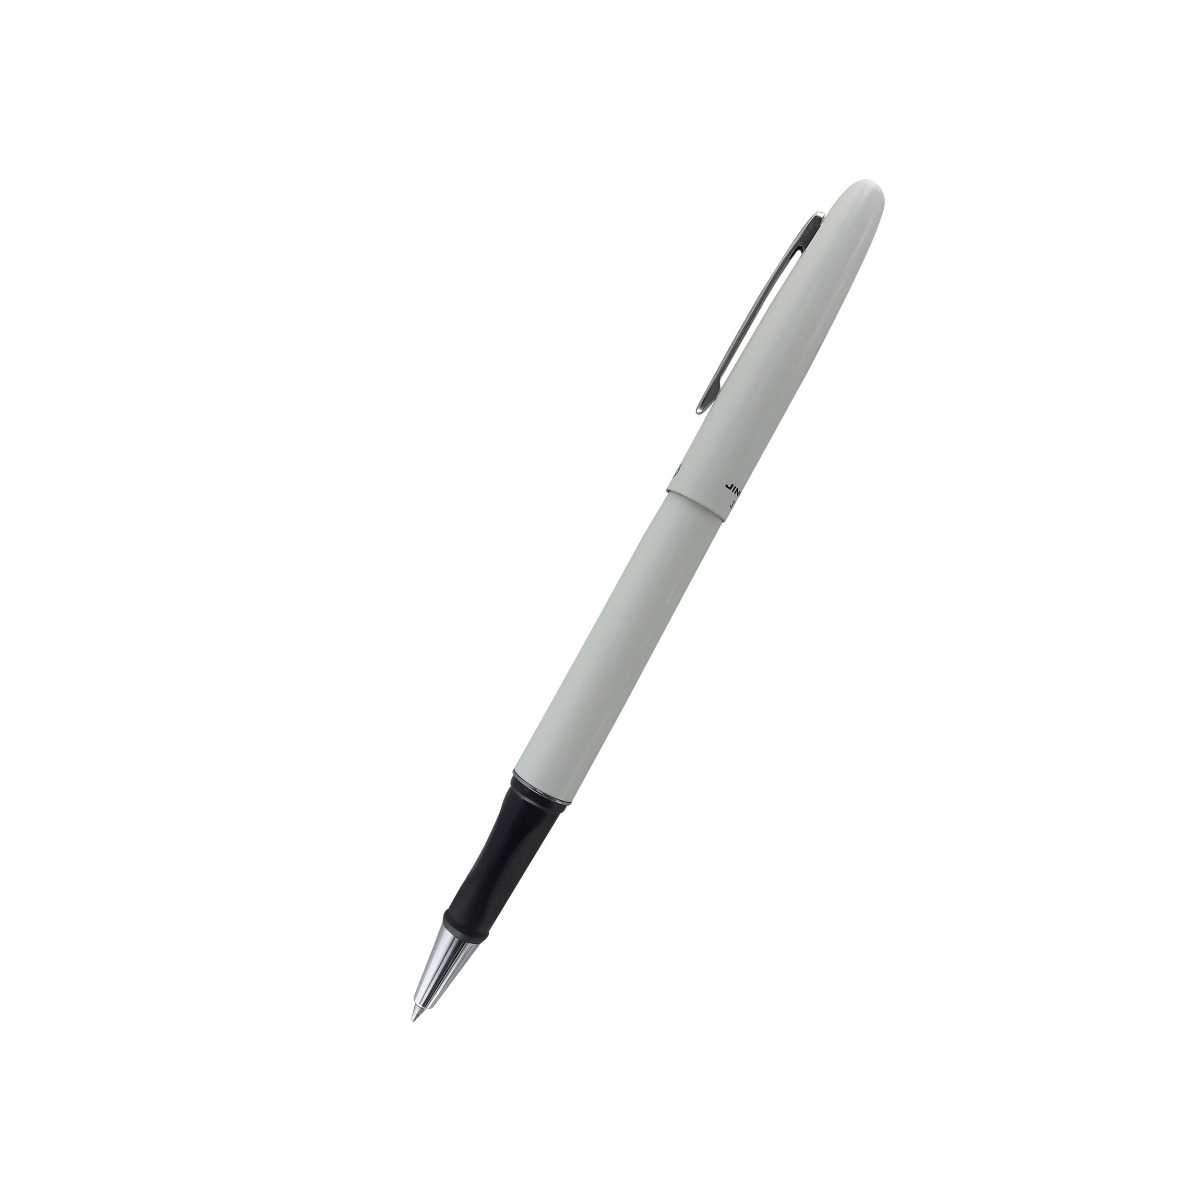 Jinhao 321 Model: 12085 White color body with silver clip medium tip cap type rollerball